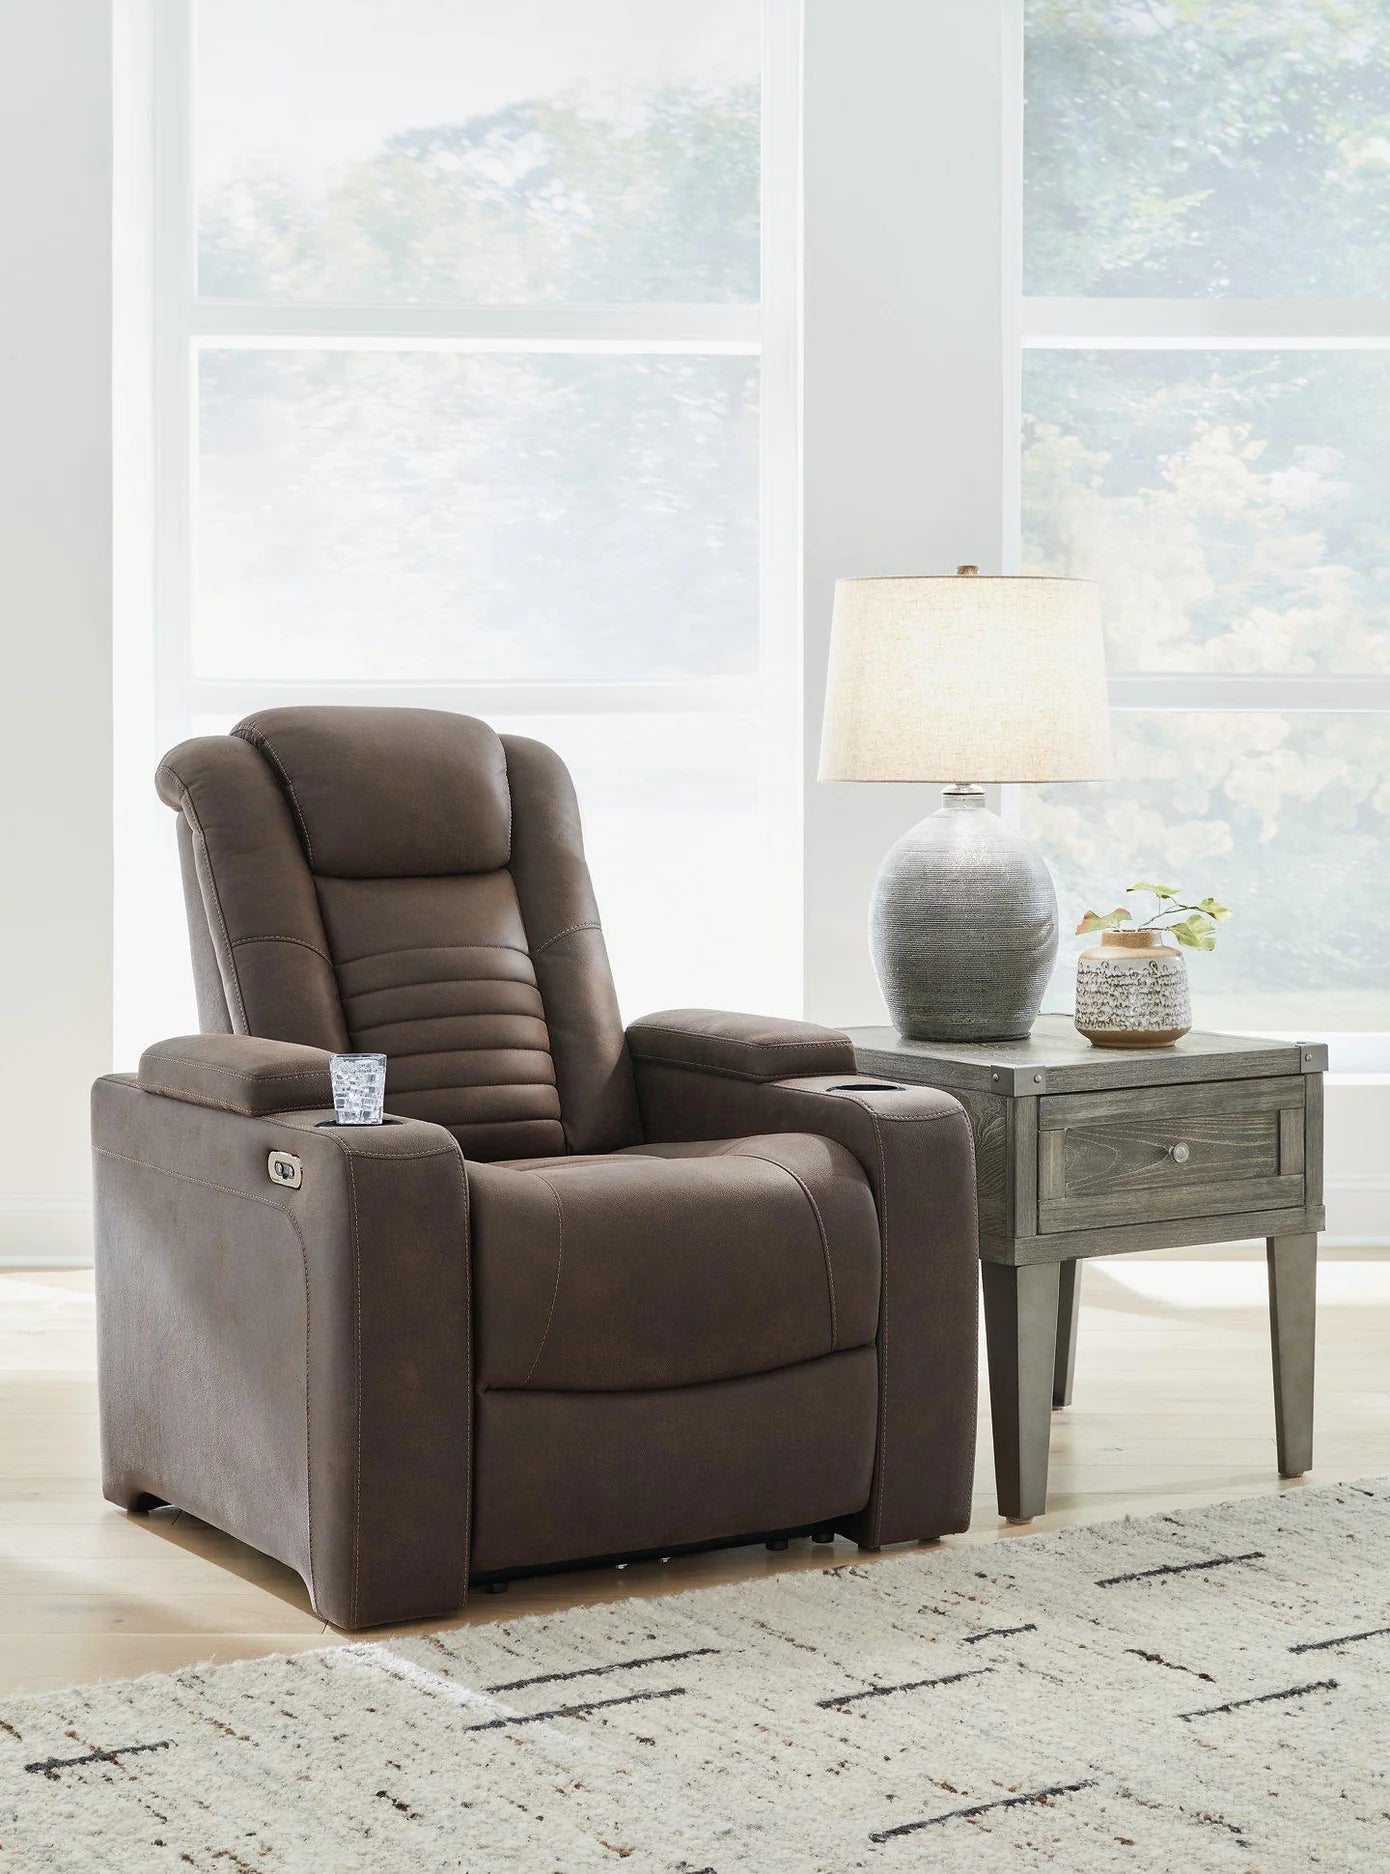 Sims furniture Recliners